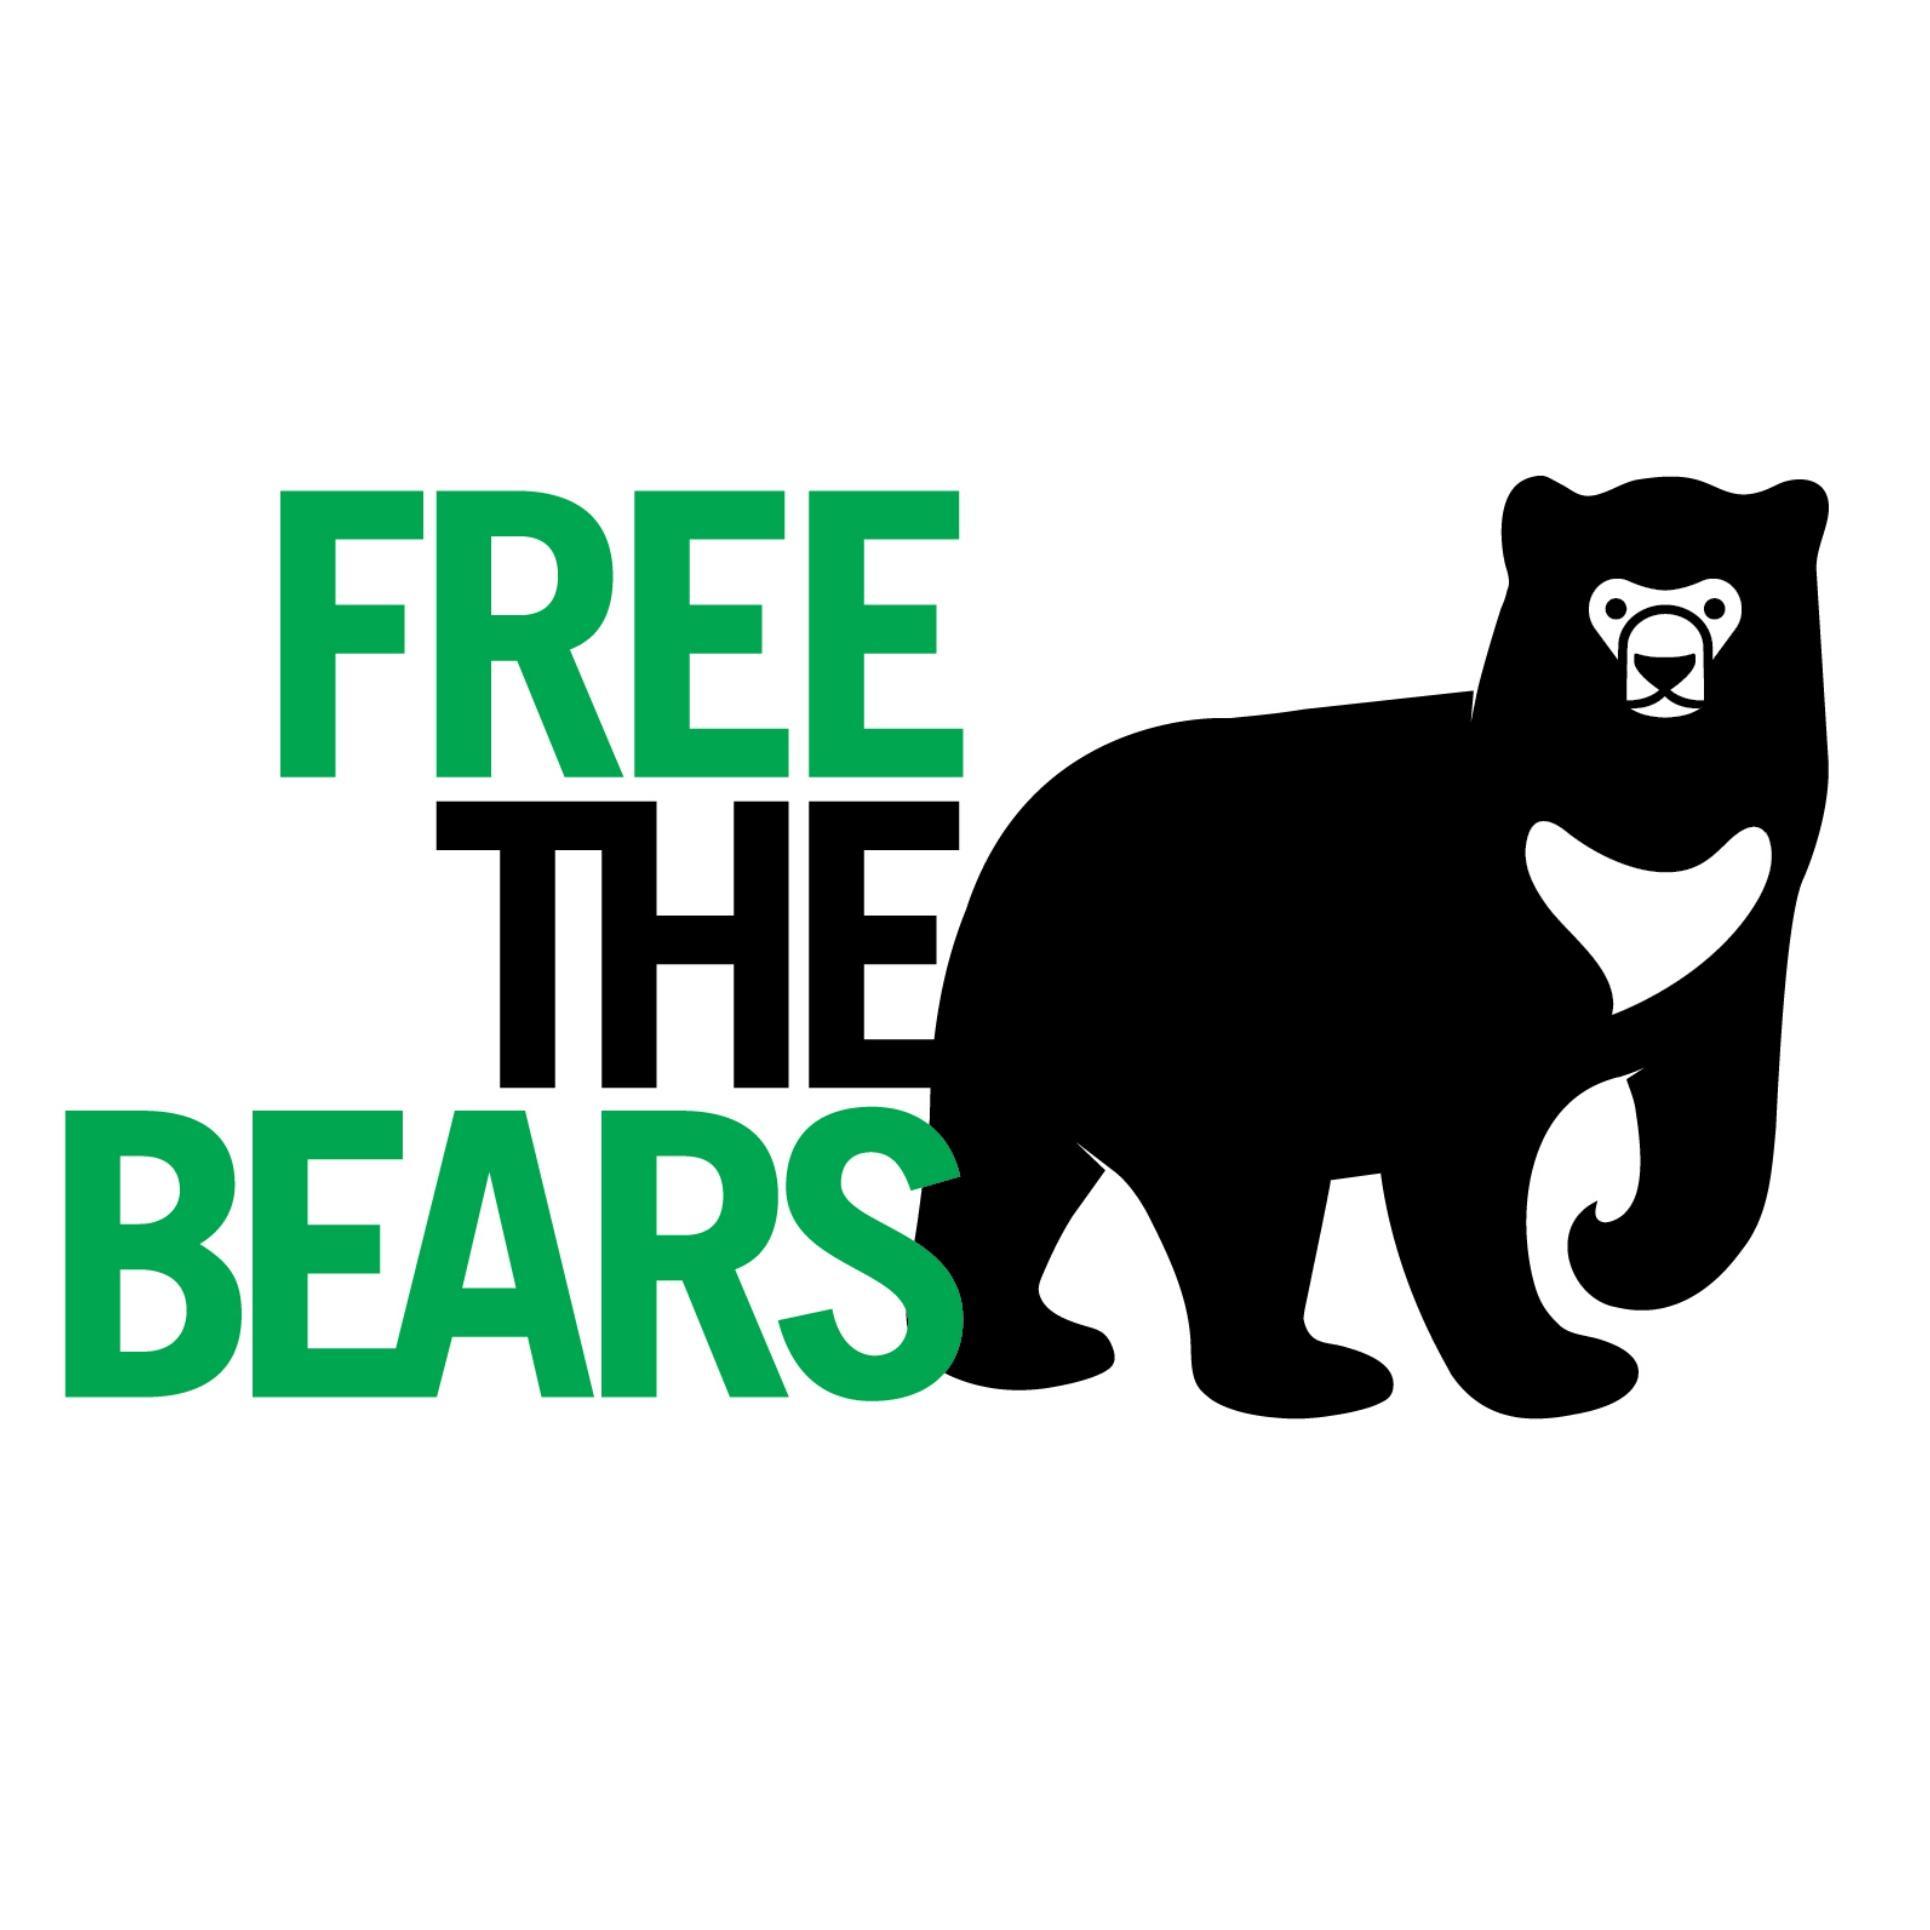 Free PNG Of Bears - 165179